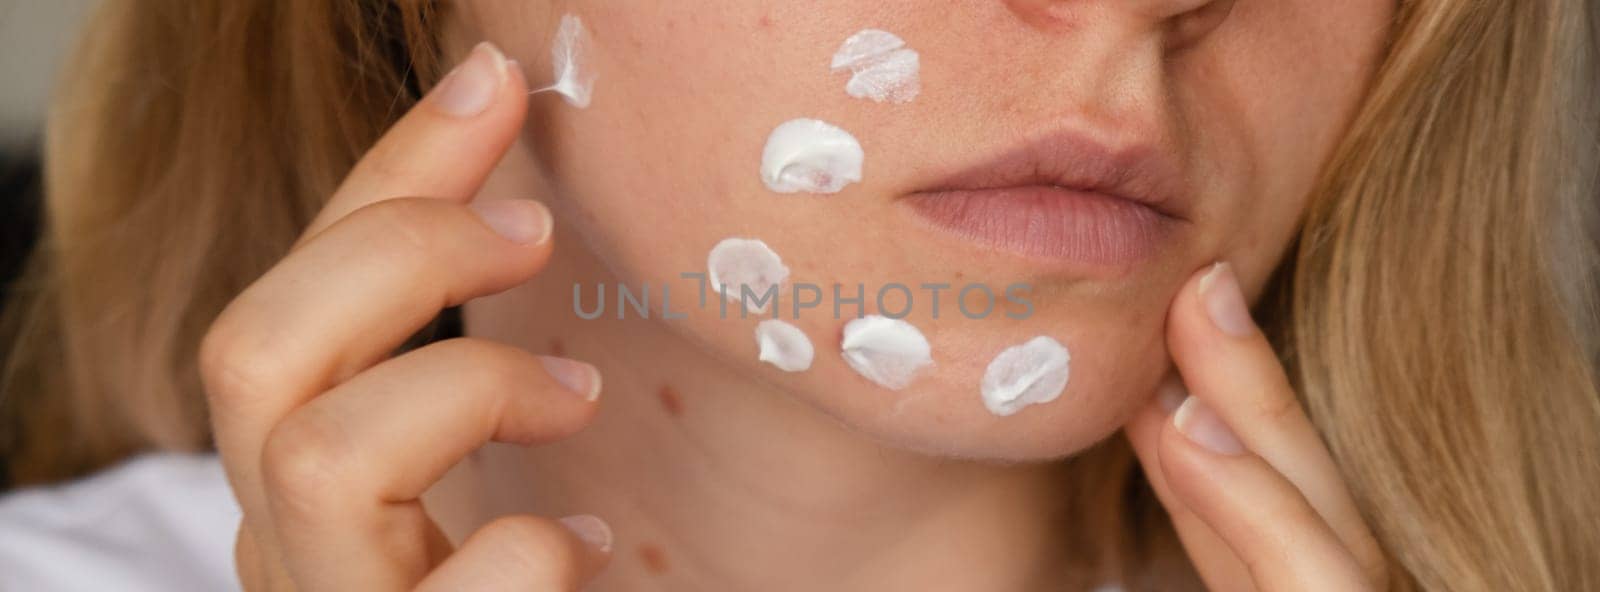 Unrecognizable woman applies makeup, cream serum cure for acne on face. Close-up acne on woman's face with rash skin ,scar and spot that allergic to cosmetics. Banner Problem skincare and health concept. Wrinkles, melasma, dark spots, freckles, dry skin, acne blackheads on face middle age women chin acne problem. pimples on the beard. problem skin in a young girl. hormonal misbalance. Skin disorders lead to depression and insecurities in women